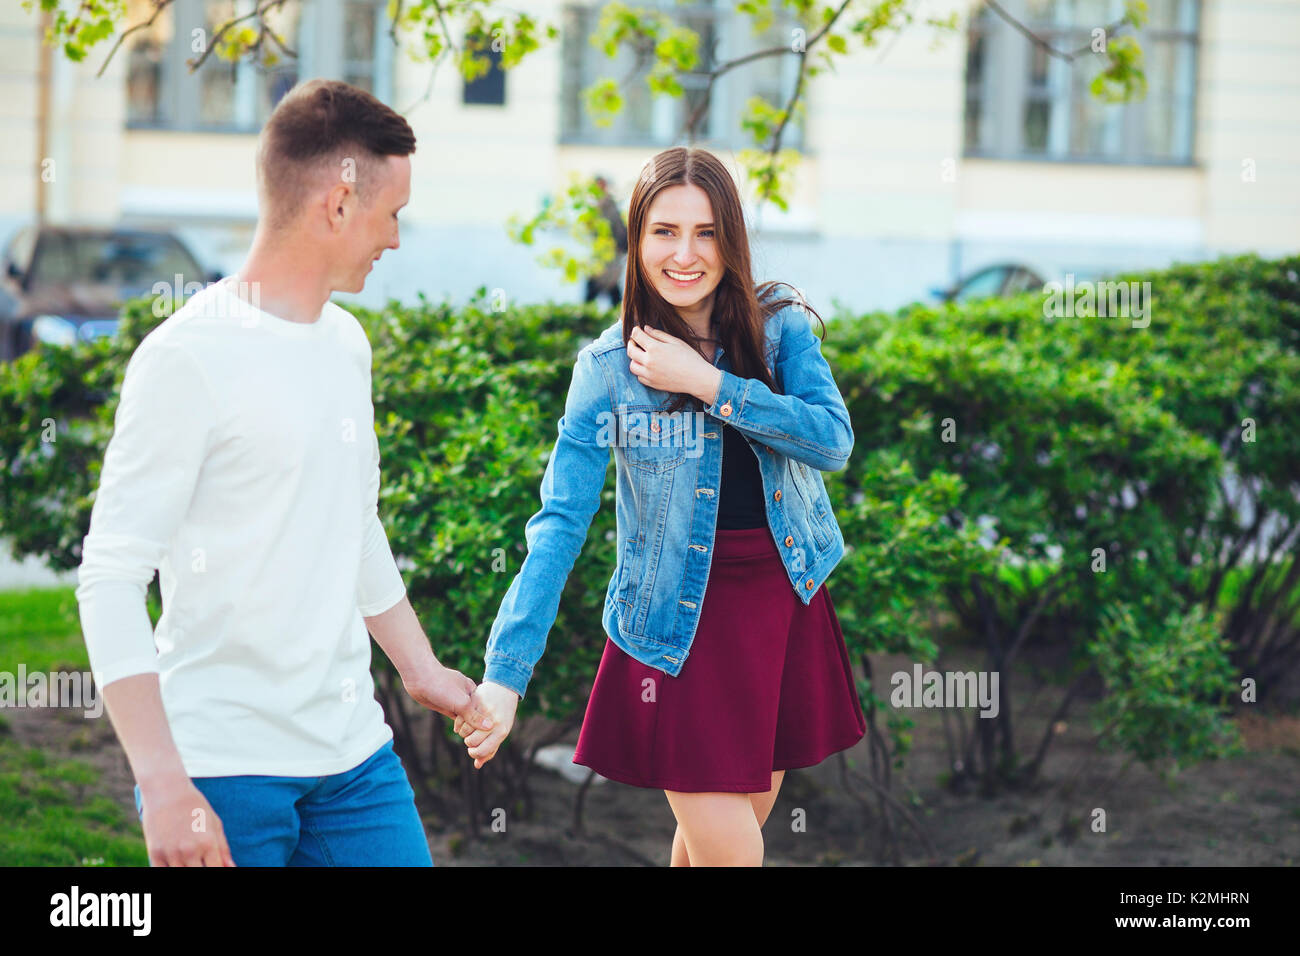 Couple of tourists taking a walk in a city street sidewalk in a sunny day Stock Photo